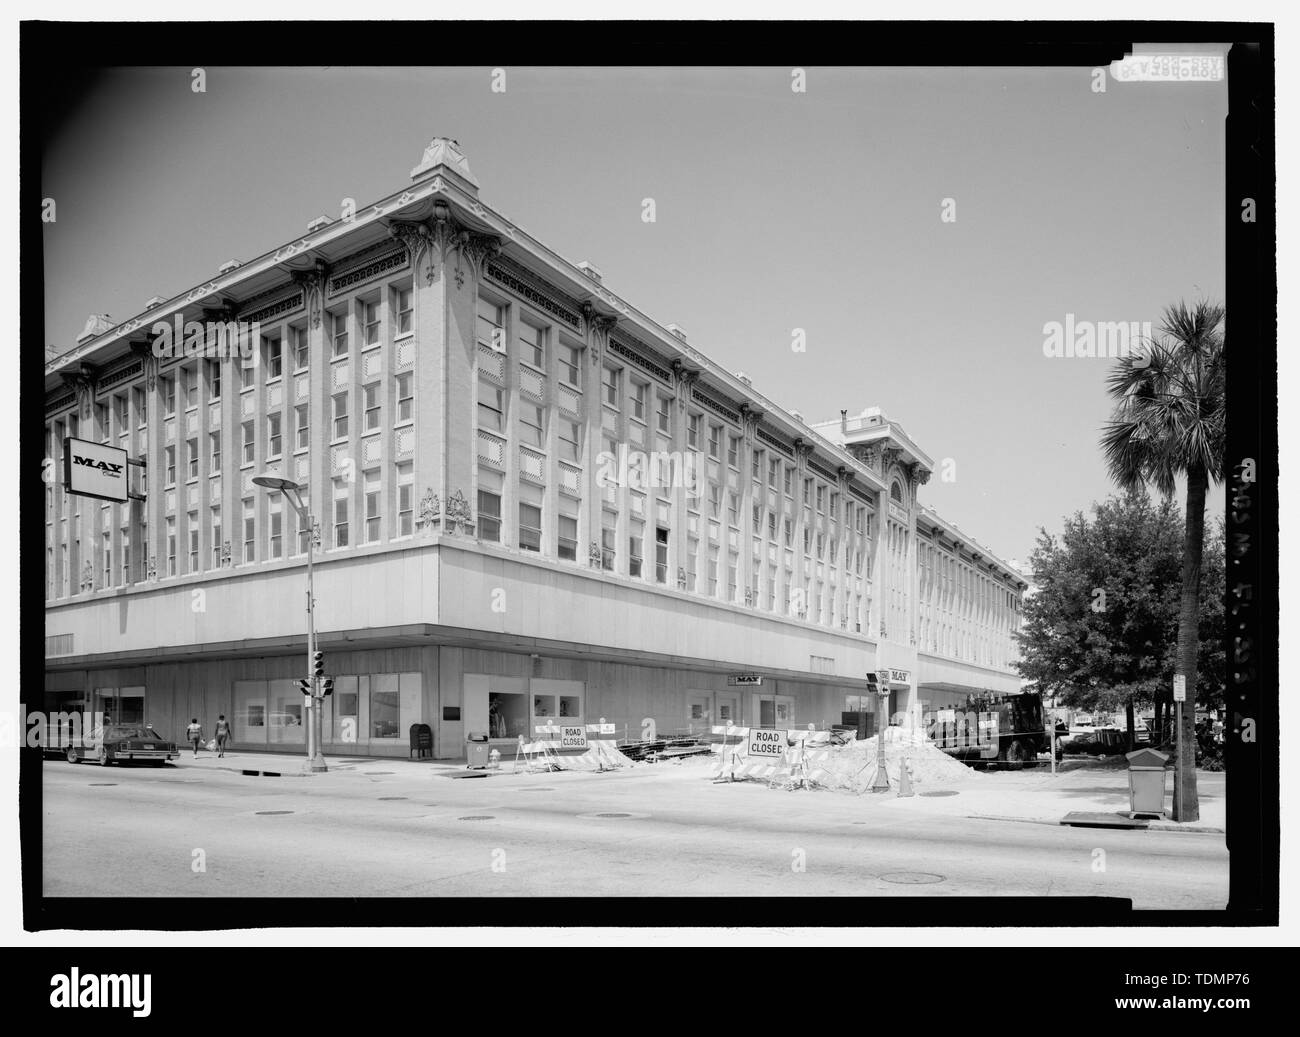 Perspective view - St. James Building, 117 West Duval Street, Jacksonville, Duval County, FL Stock Photo